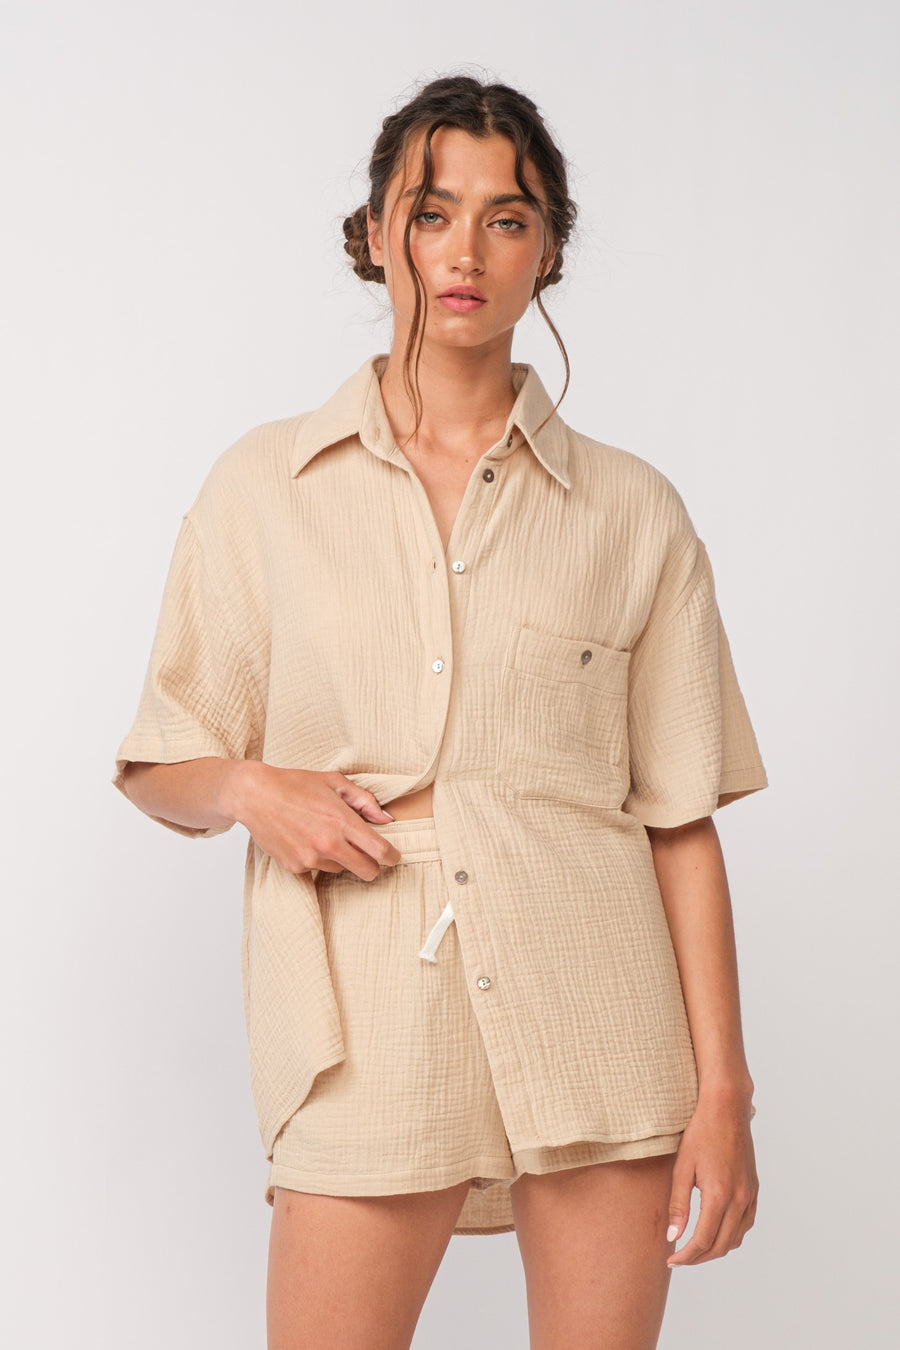 Candy tan colored short sleeve shirt with collar.